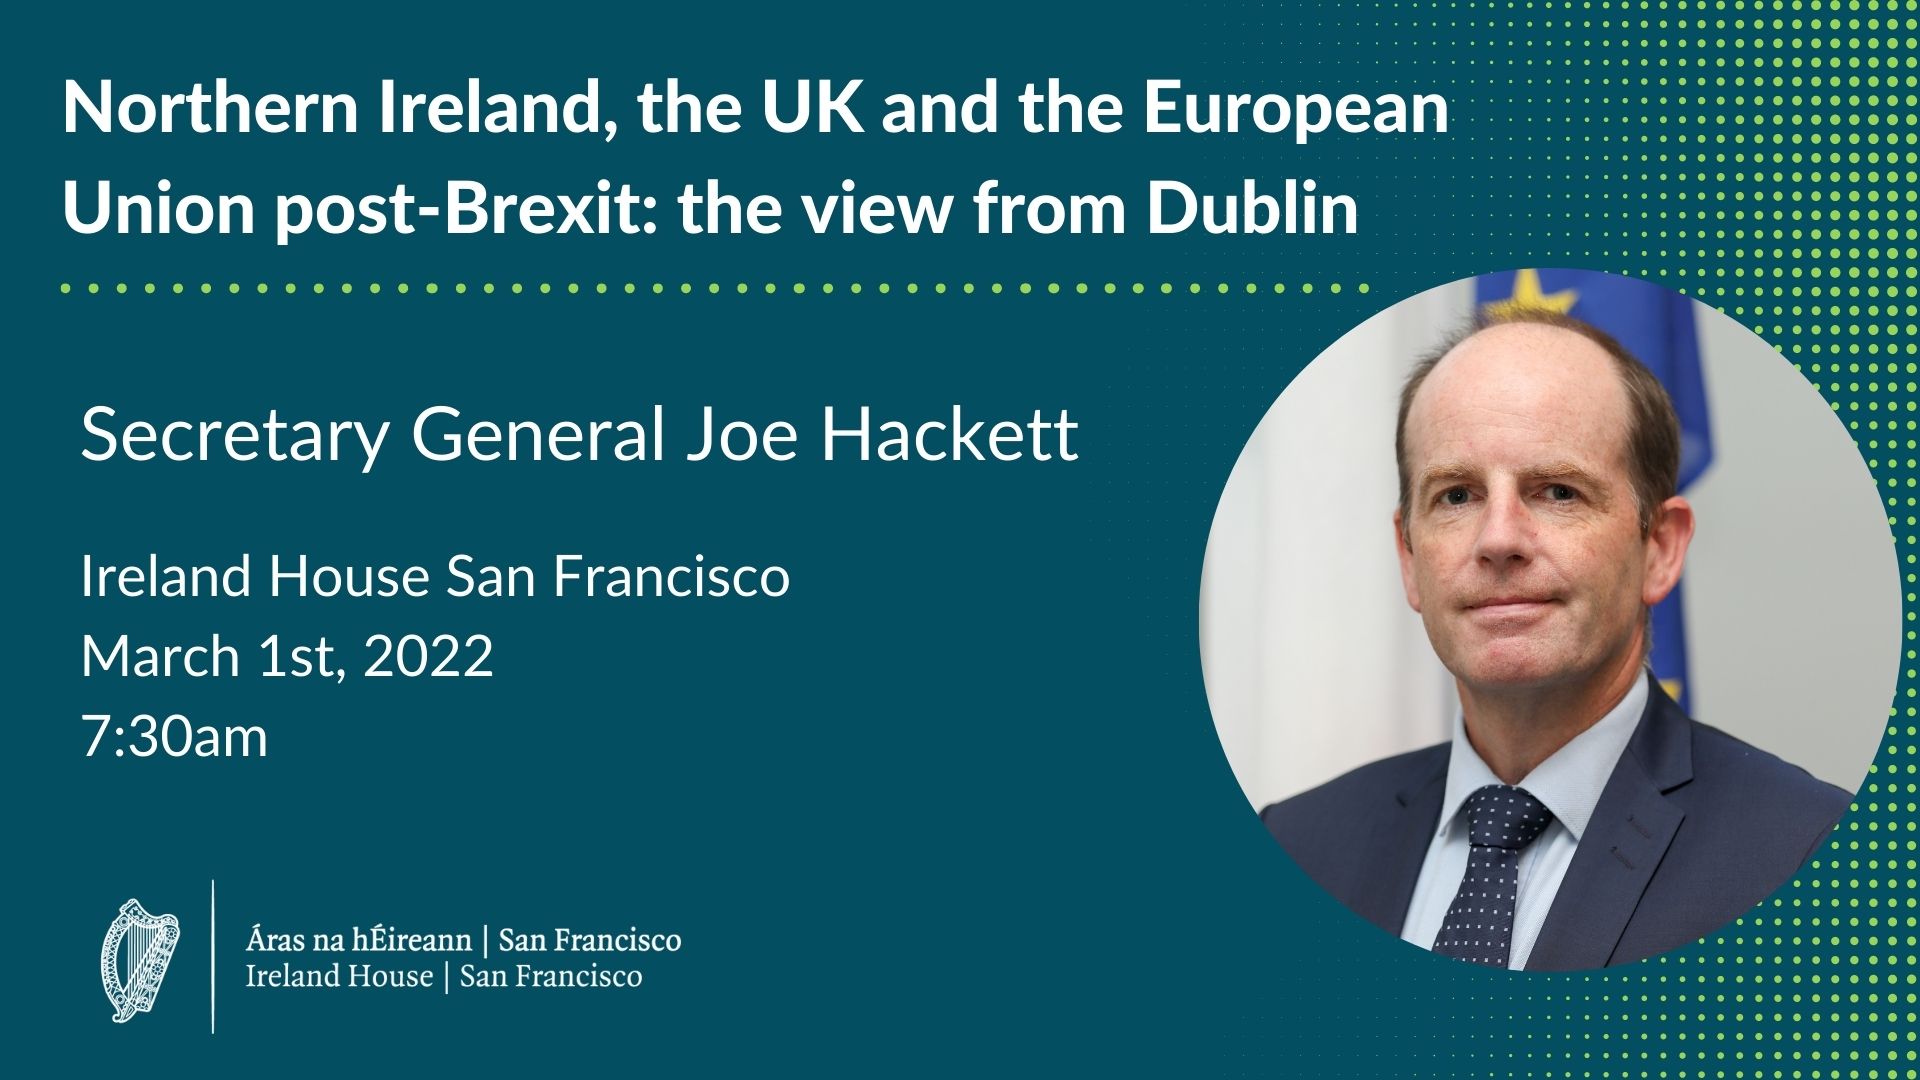 Consulate General of Ireland Newsletter, 17 February 2022